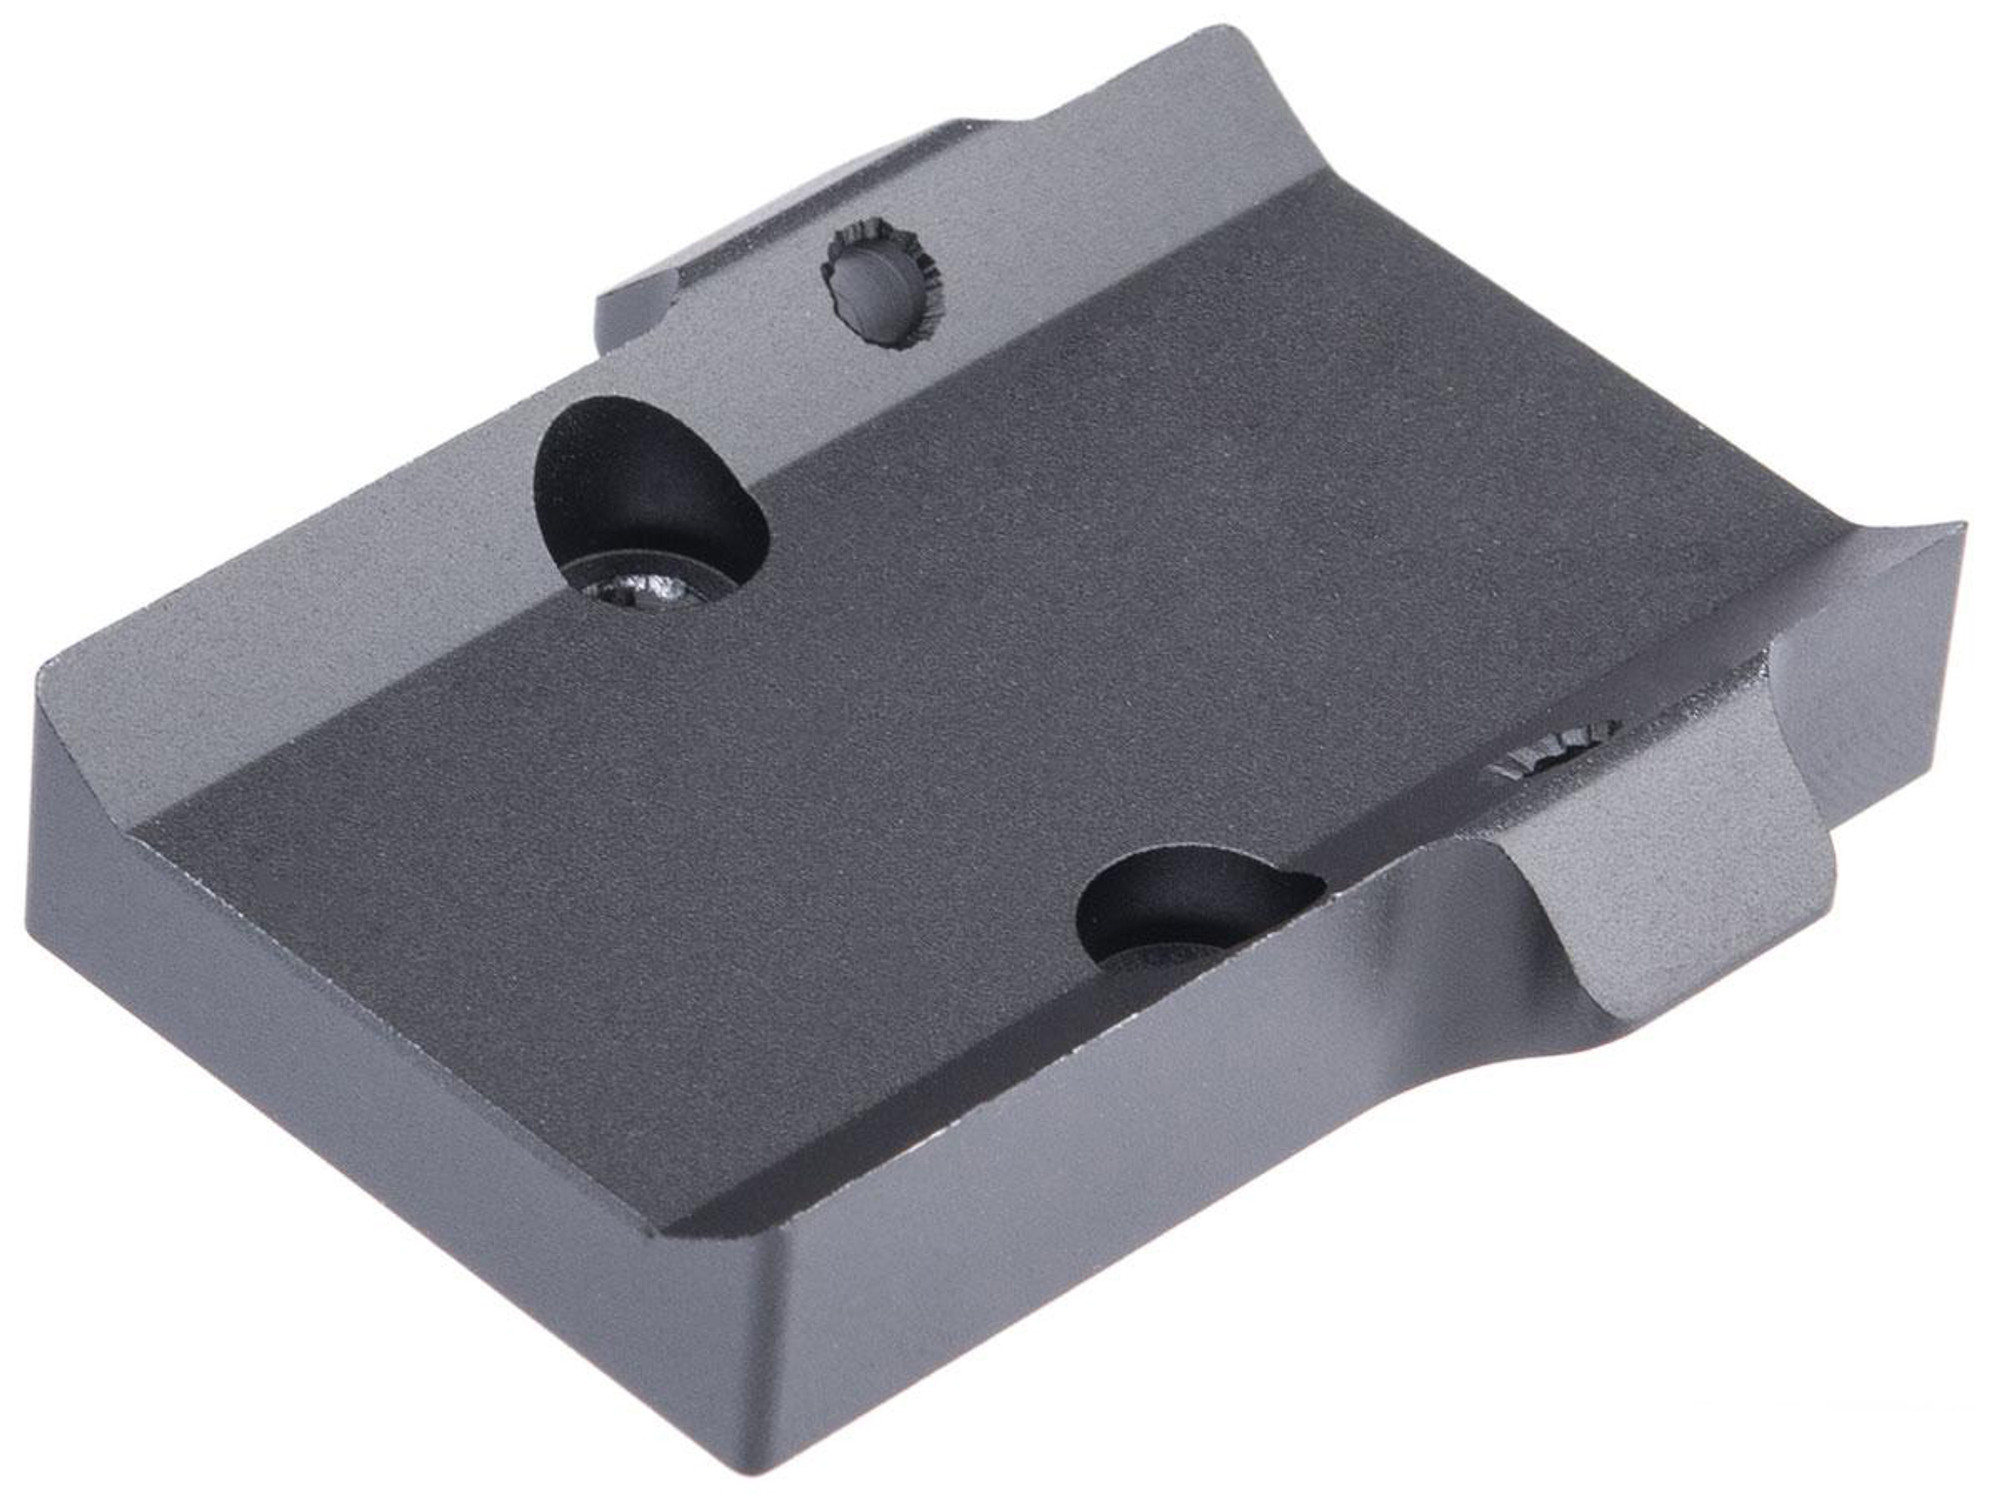 ARES SM-013 CNC Metal Mount for ARES SC-016 Micro Red Dot Sight